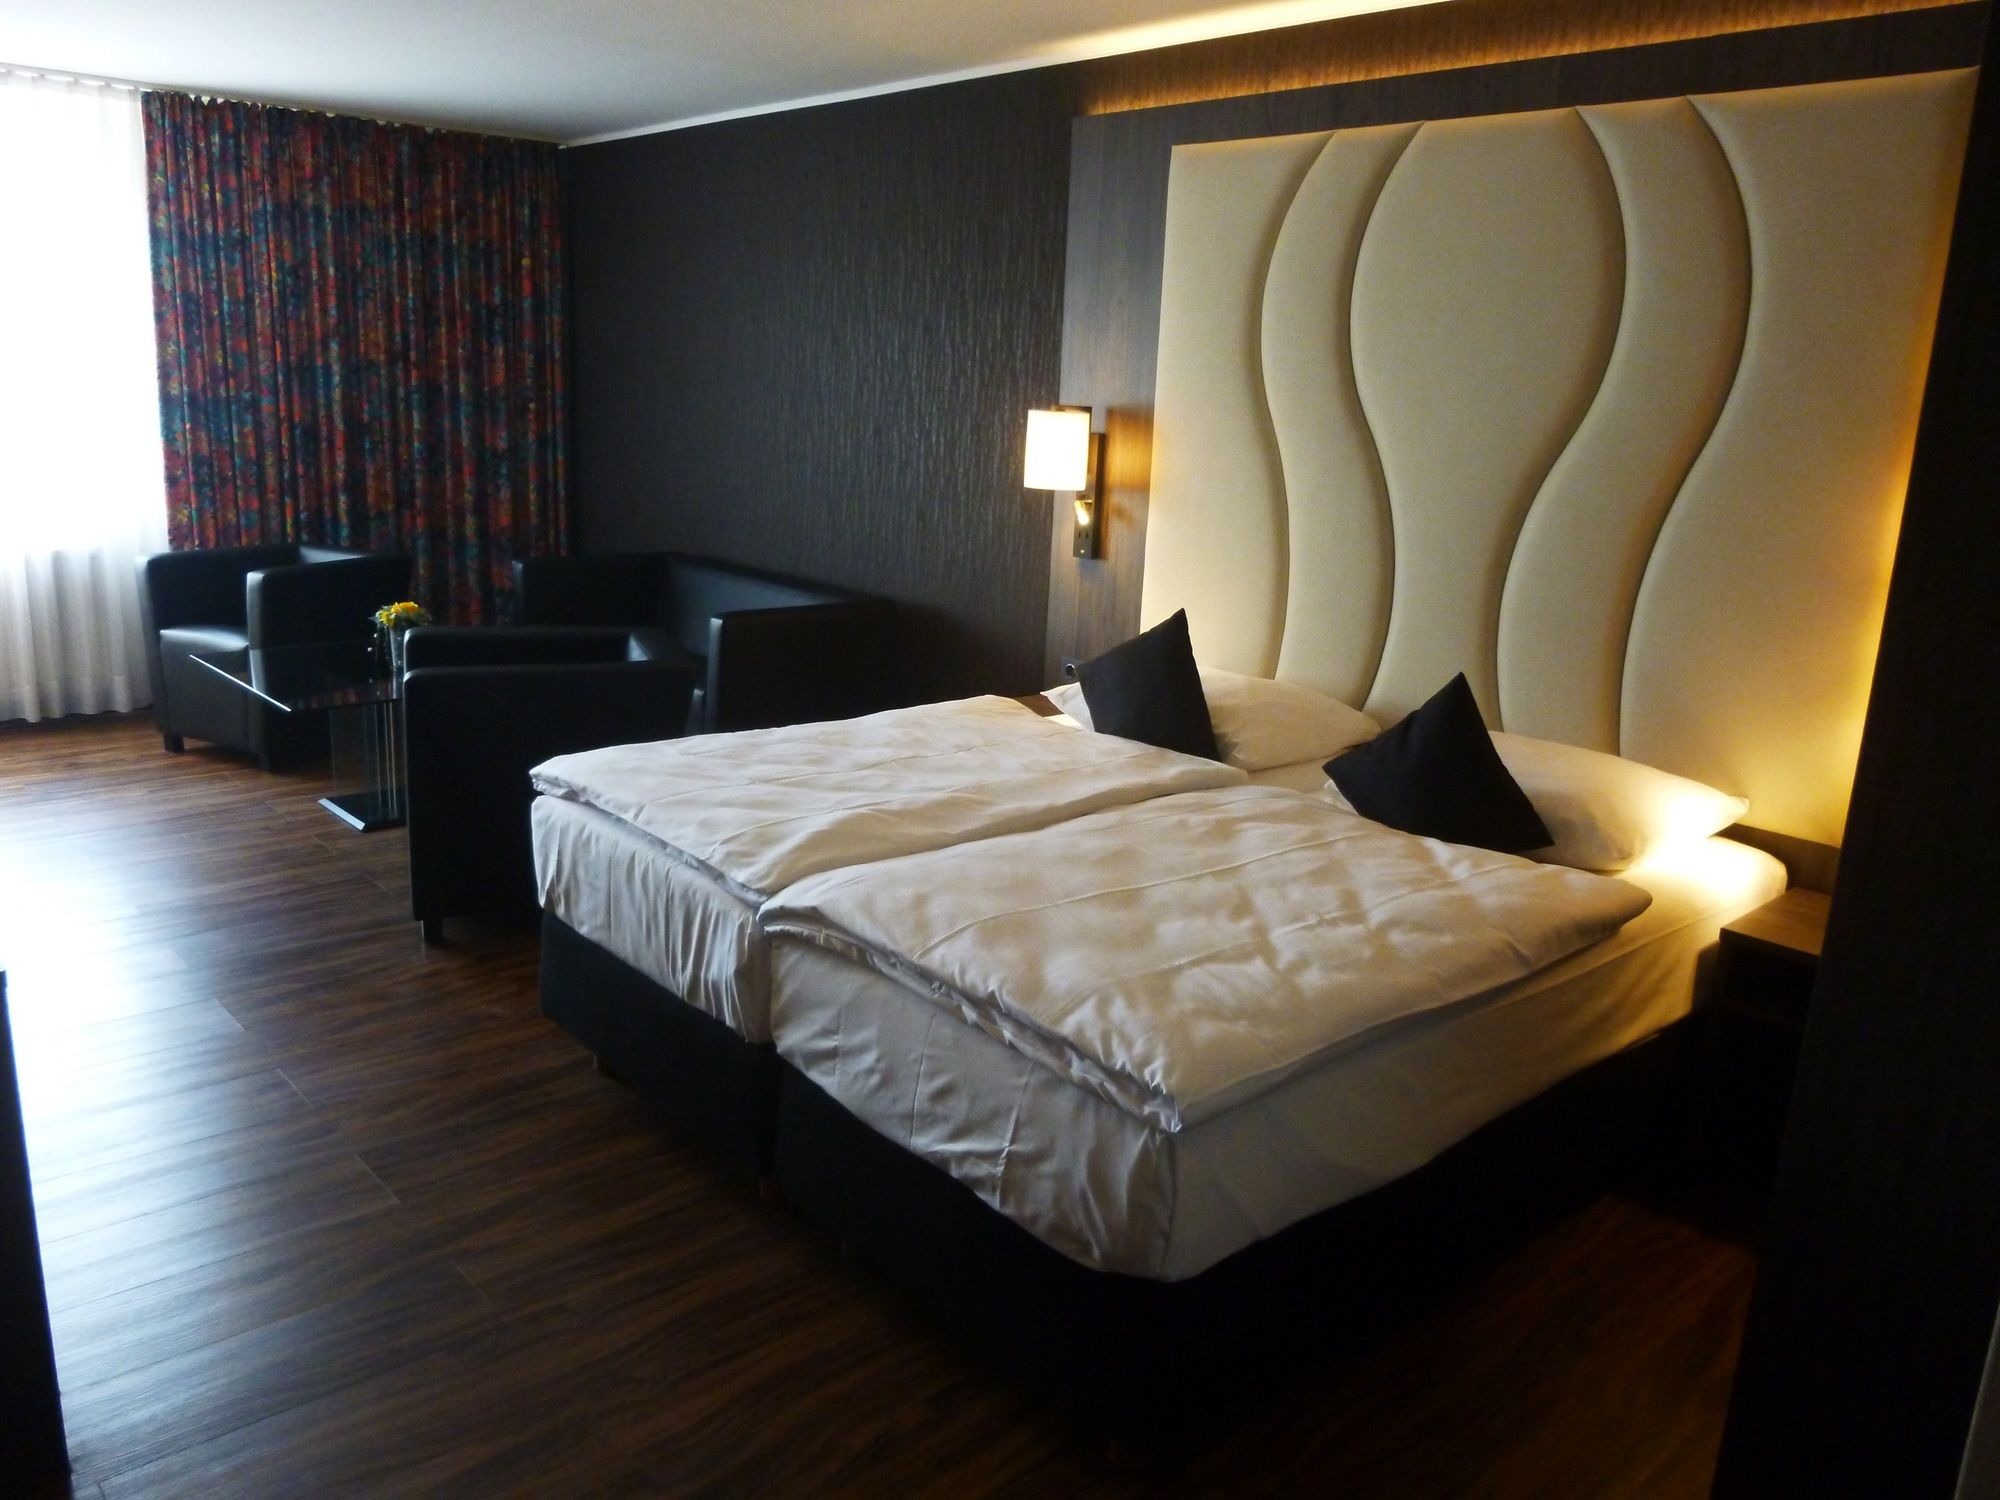 Best Western Plaza Hotel Grevenbroich <br/>66.67 ew <br/> <a href='http://vakantieoplossing.nl/outpage/?id=c8639b32a1d4353f39dc3fbced5affc1' target='_blank'>View Details</a>